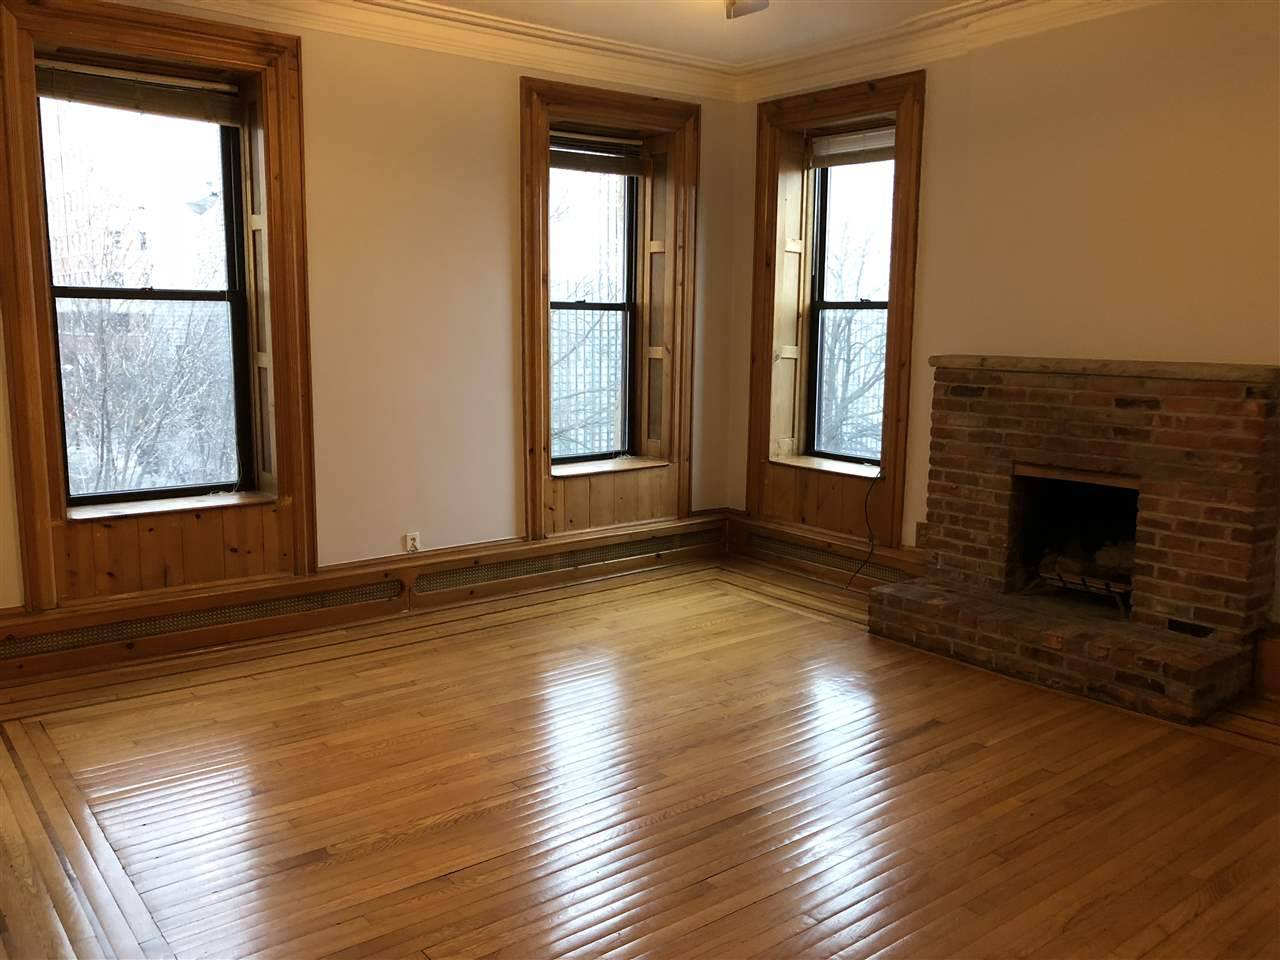 Gorgeous historical 1 Bedroom Condo in a great location 3 minutes from the PATH with loads of charm